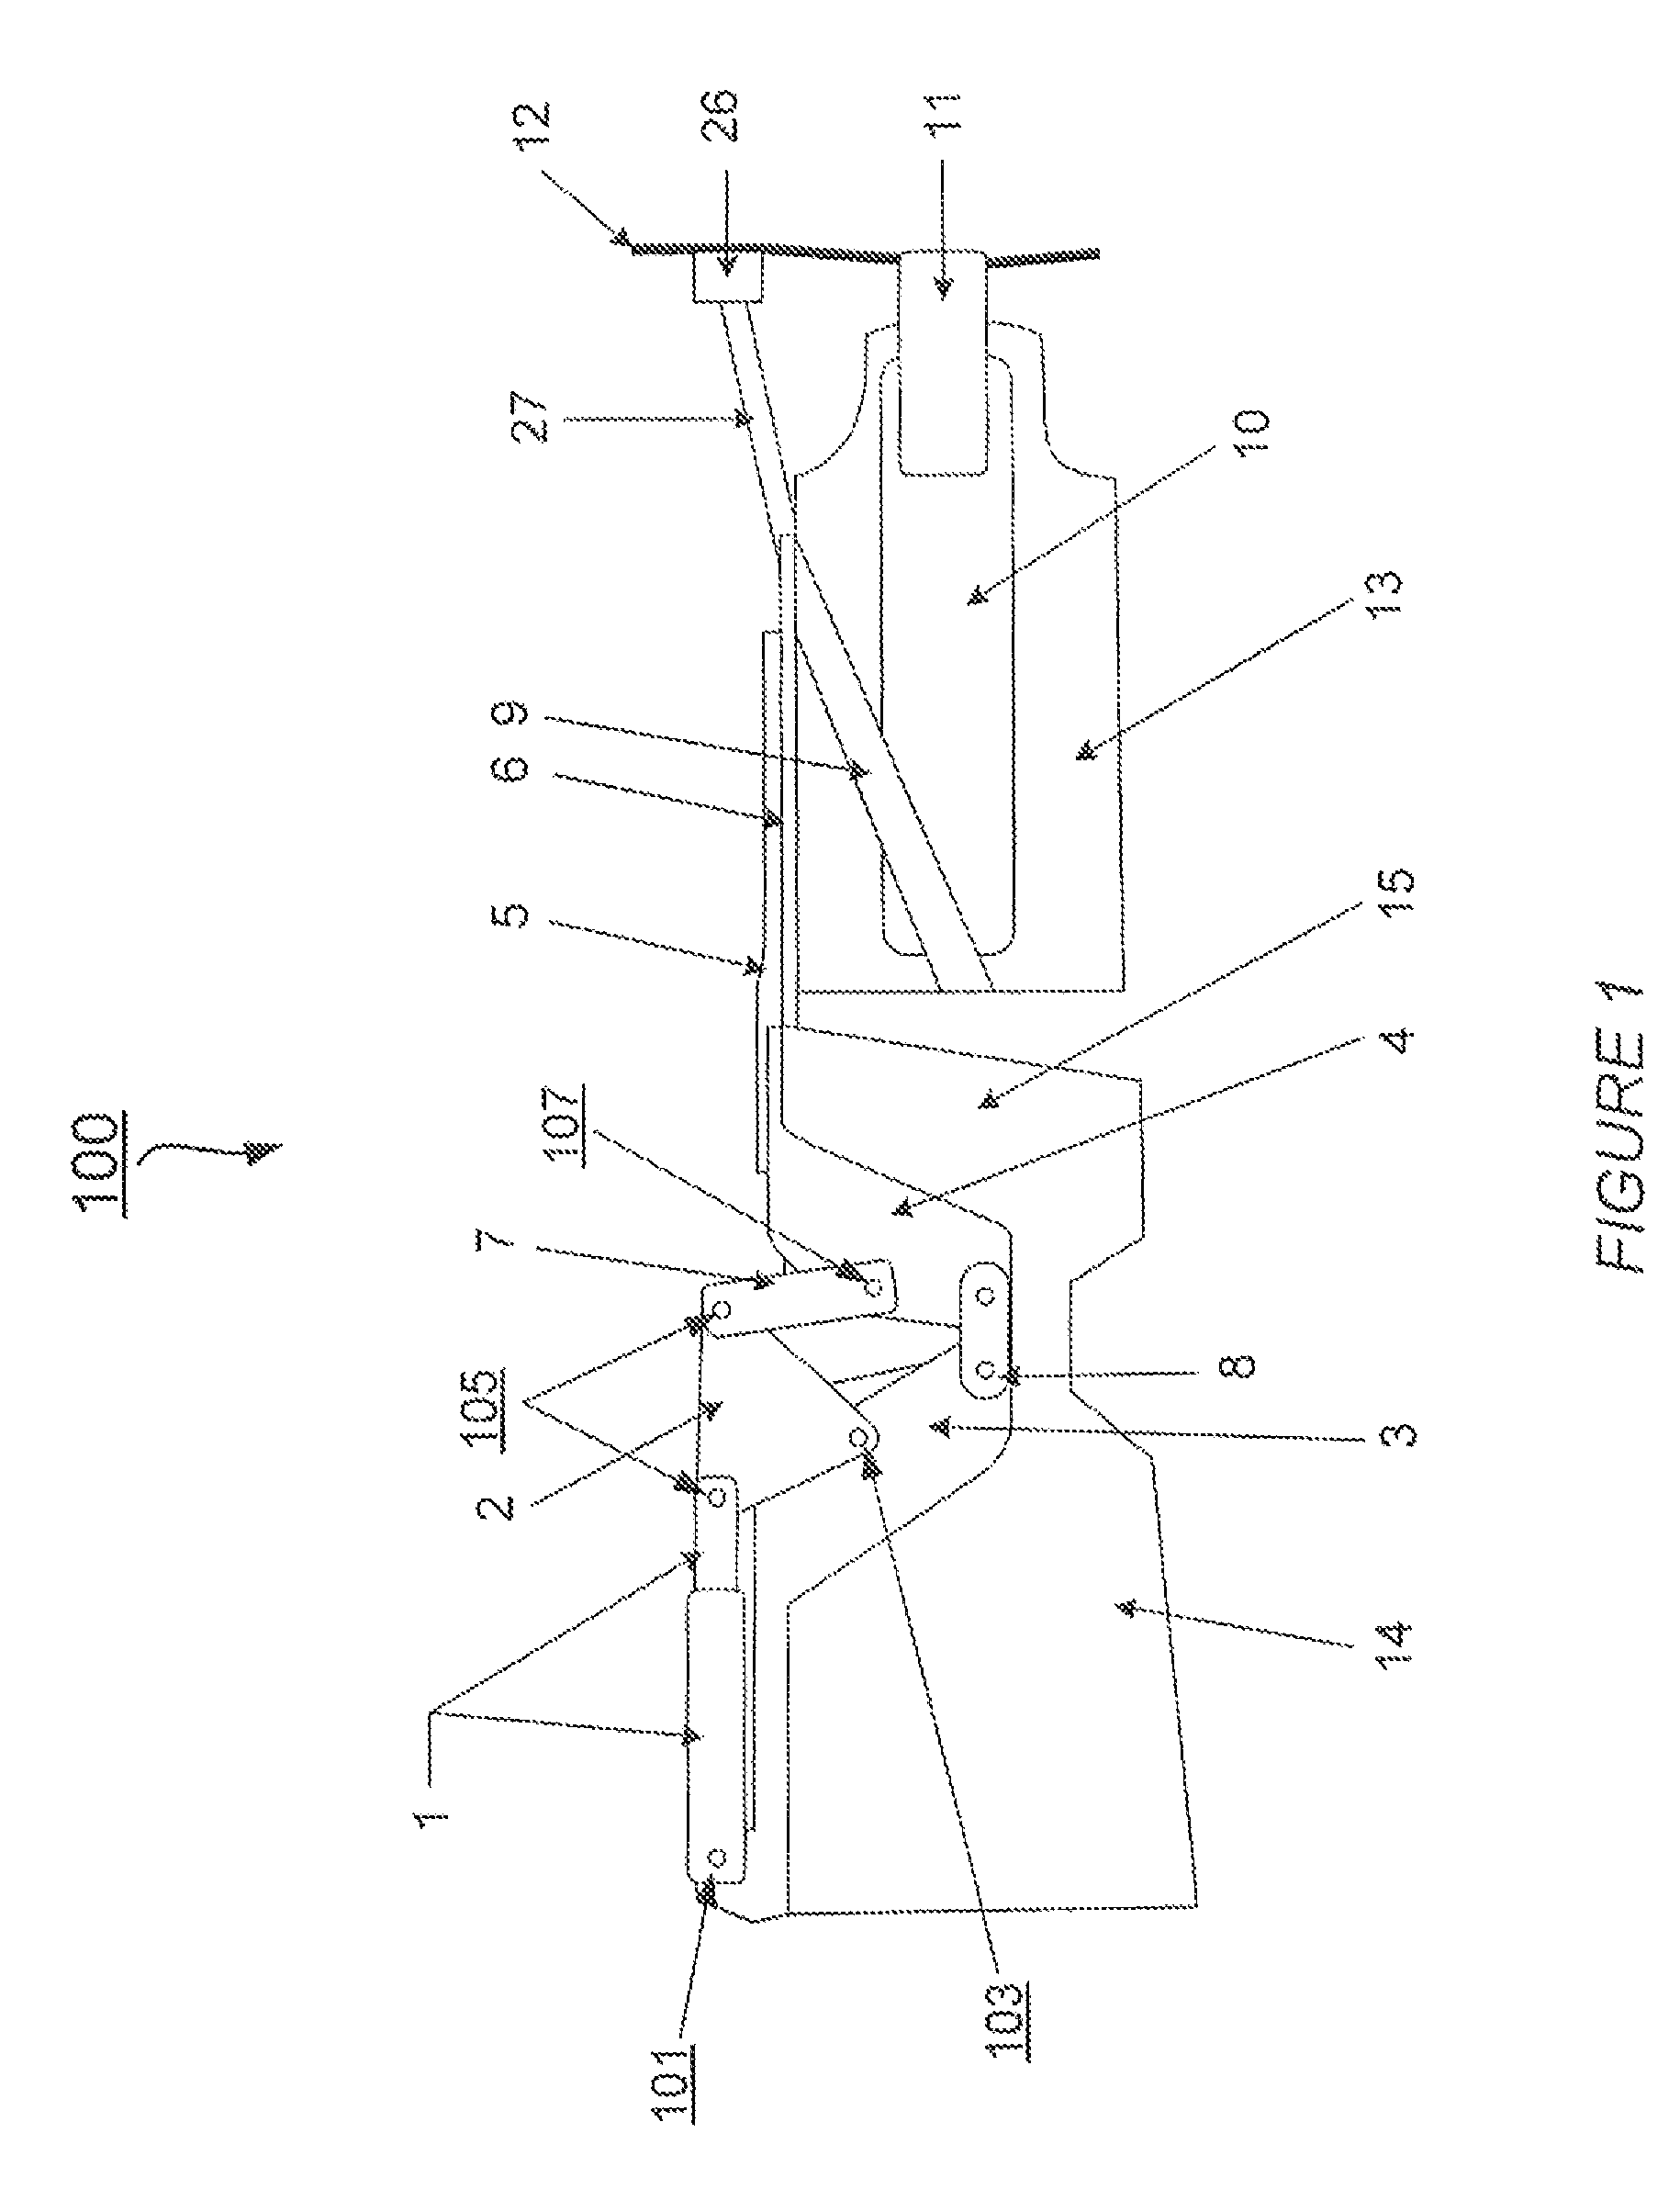 Multi-fit orthotic and mobility assistance apparatus